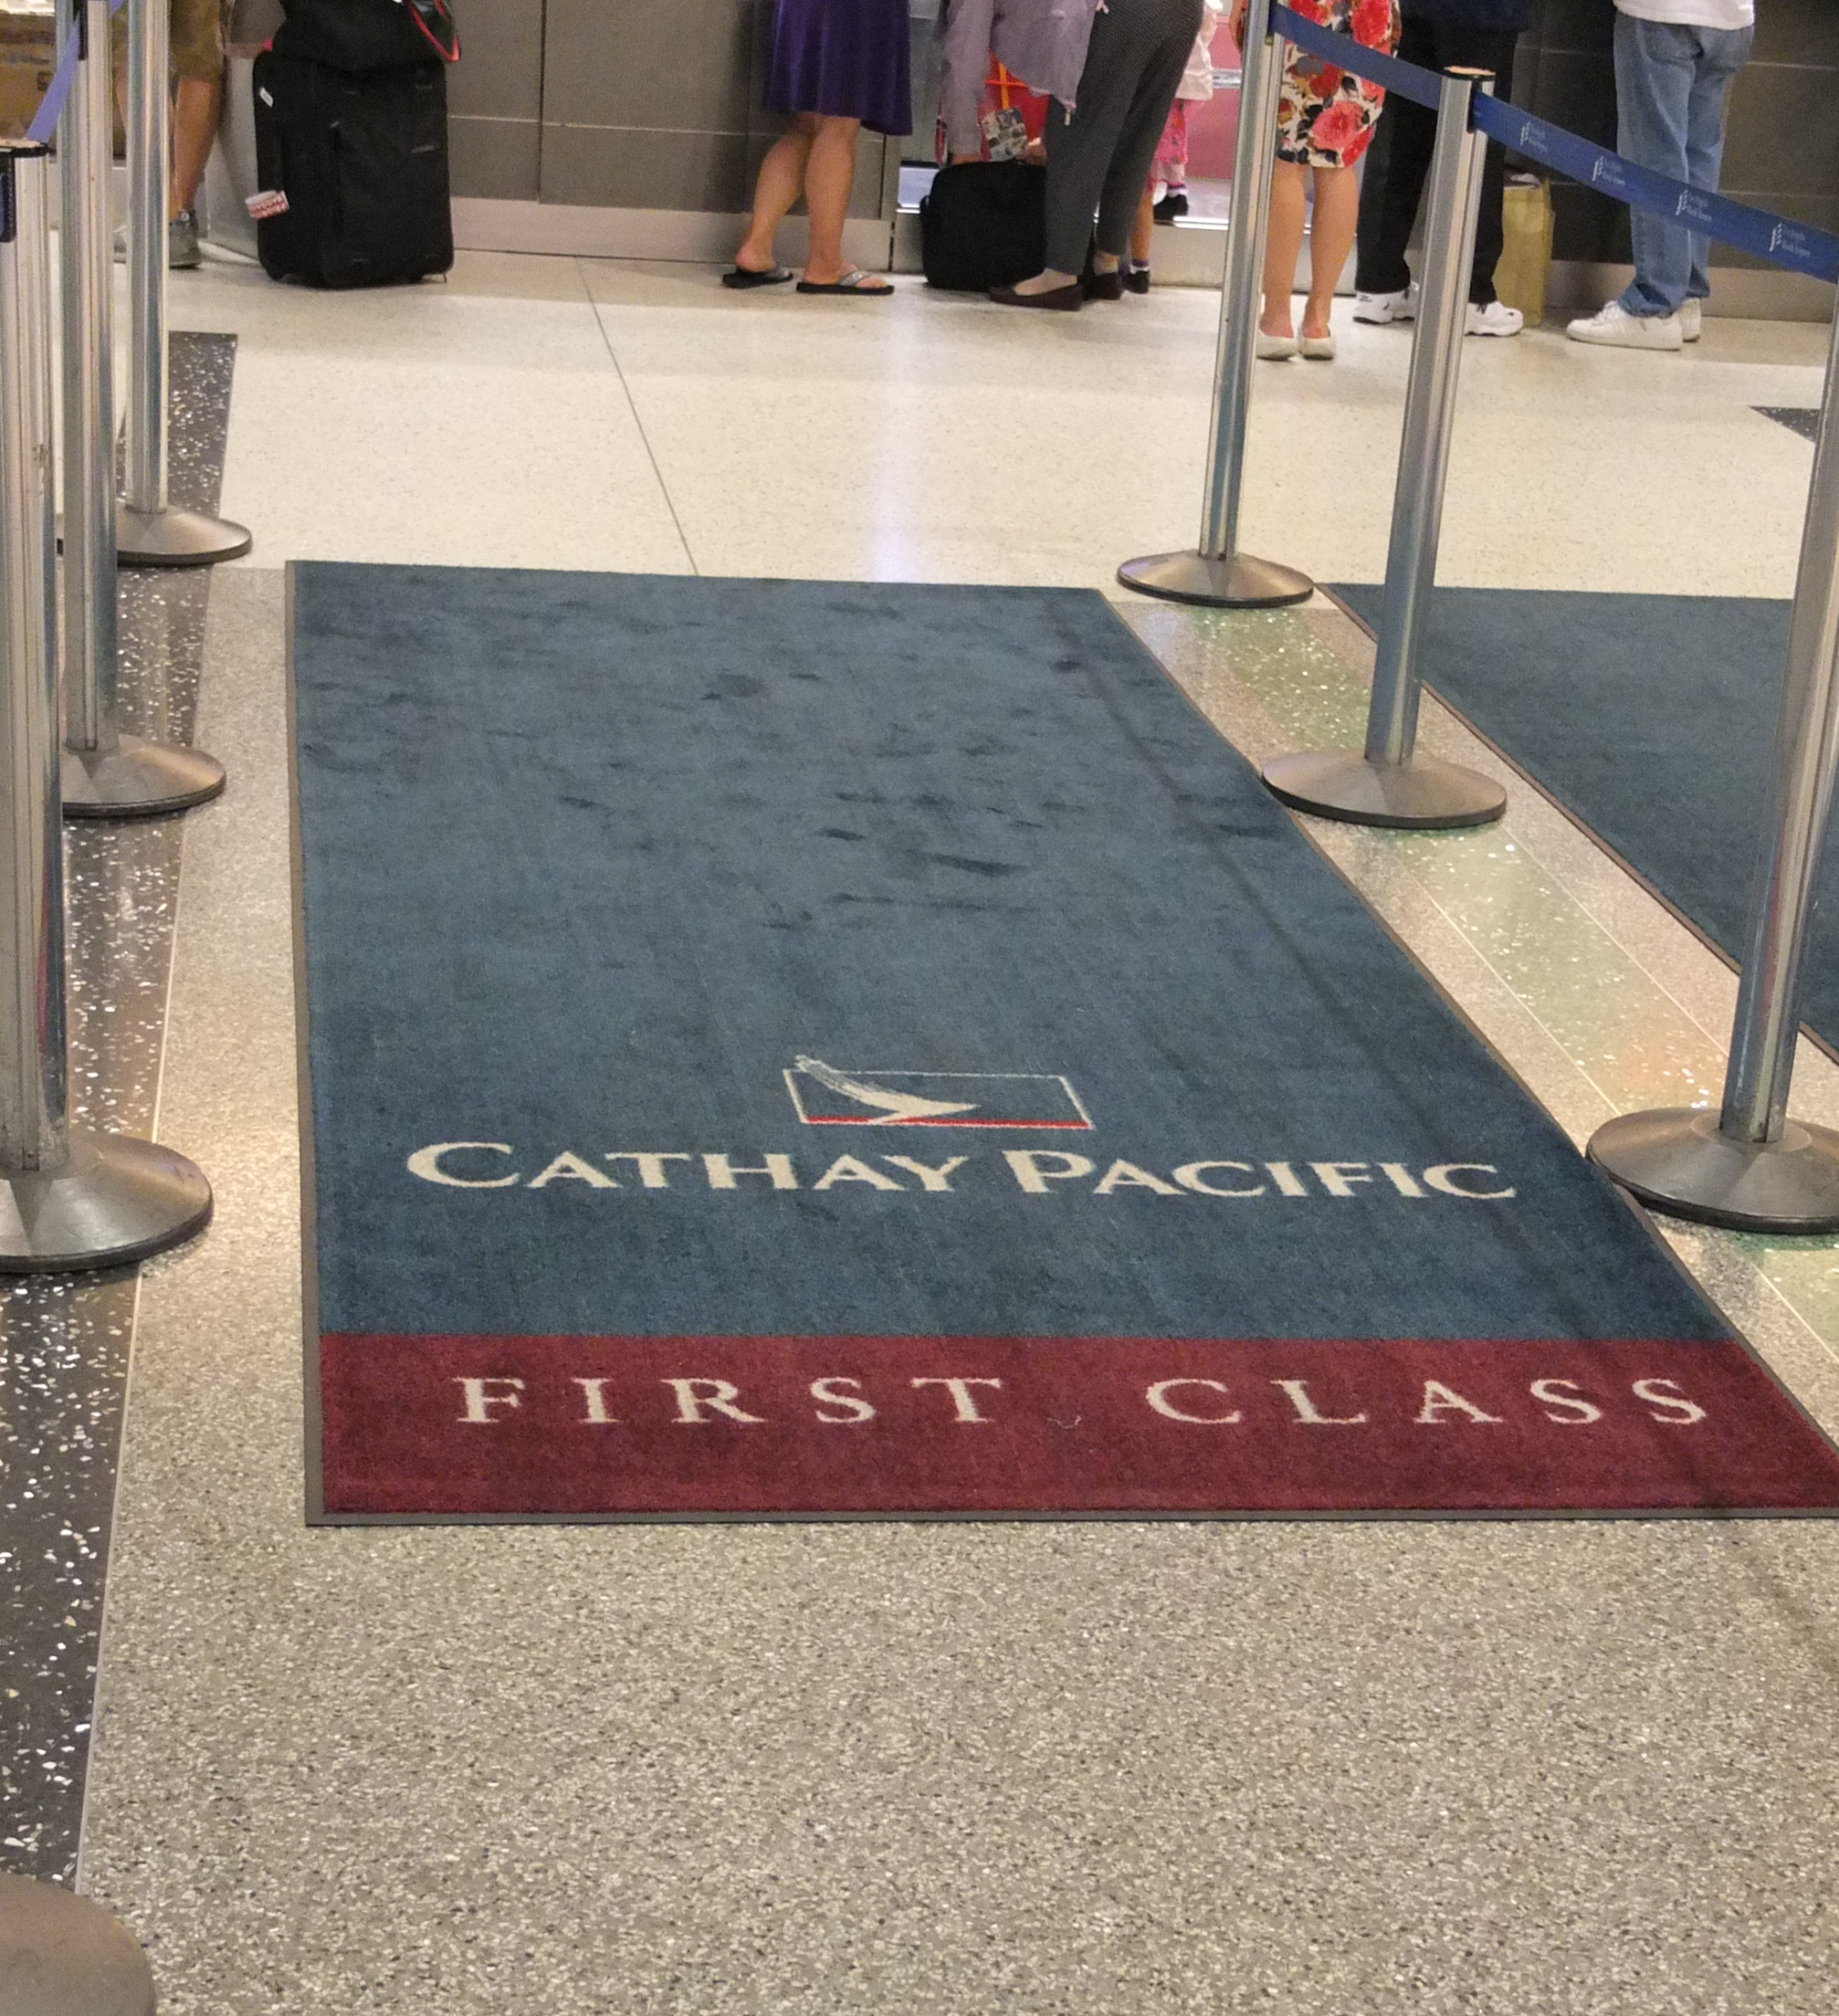 a carpet with a name on it